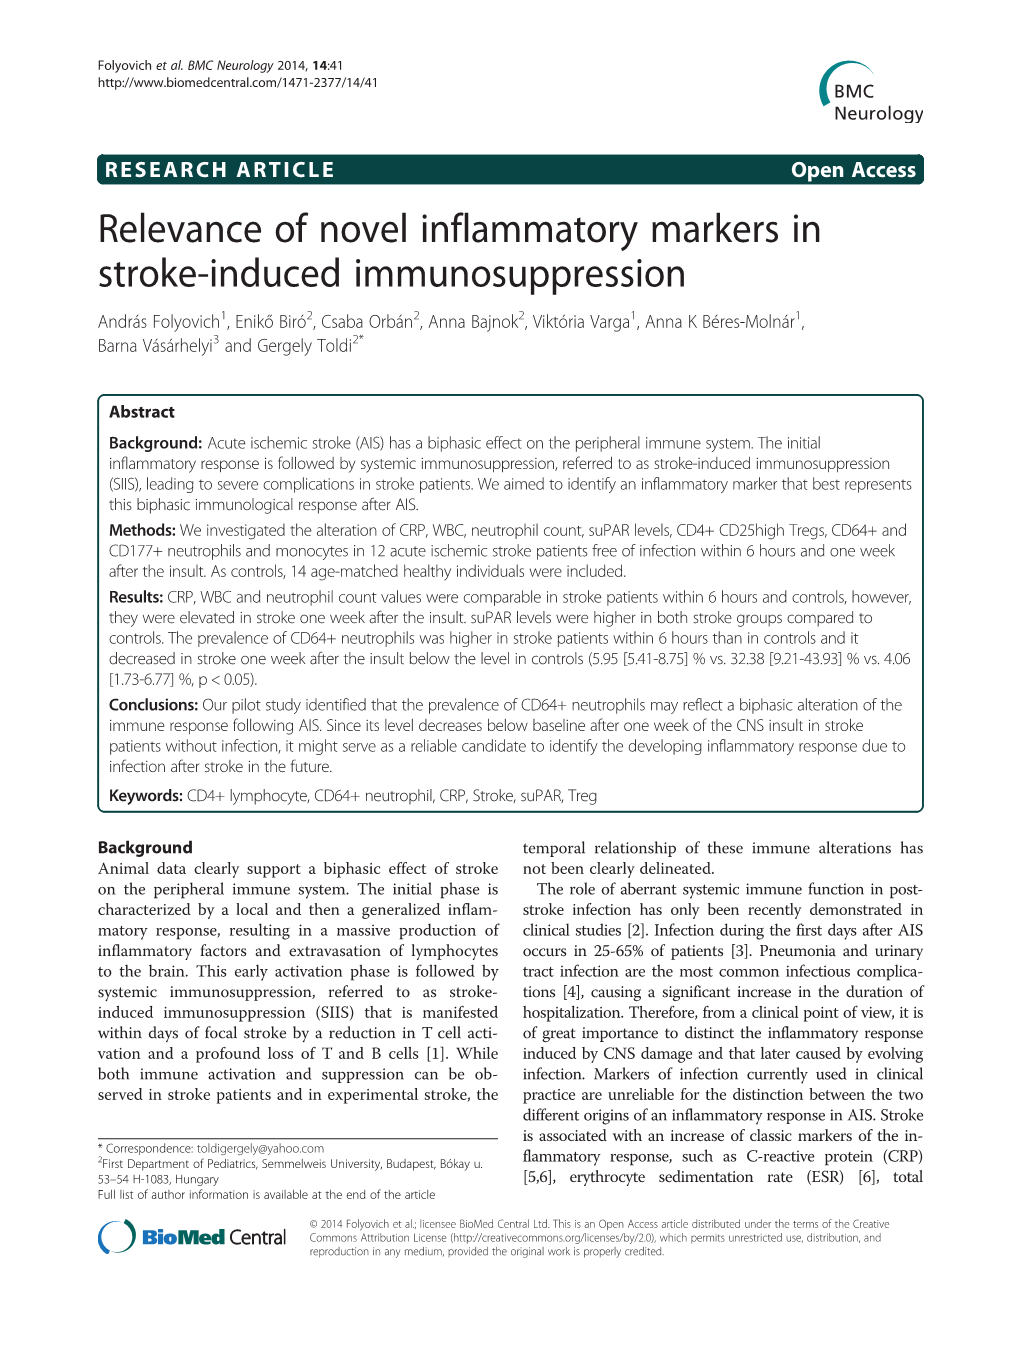 Relevance of Novel Inflammatory Markers in Stroke-Induced